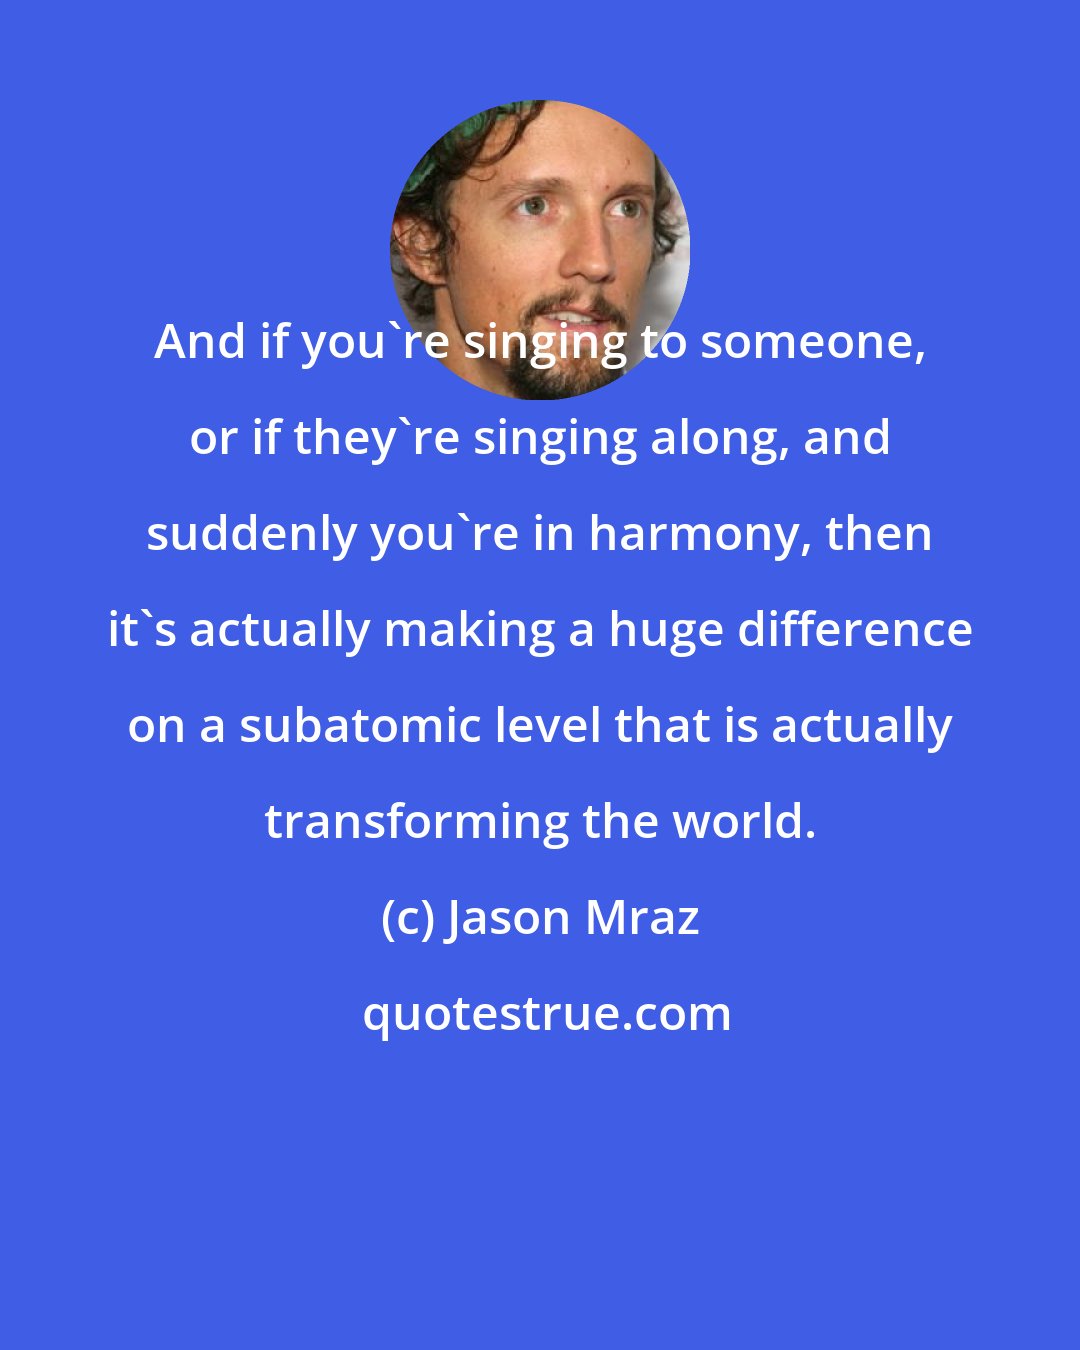 Jason Mraz: And if you're singing to someone, or if they're singing along, and suddenly you're in harmony, then it's actually making a huge difference on a subatomic level that is actually transforming the world.